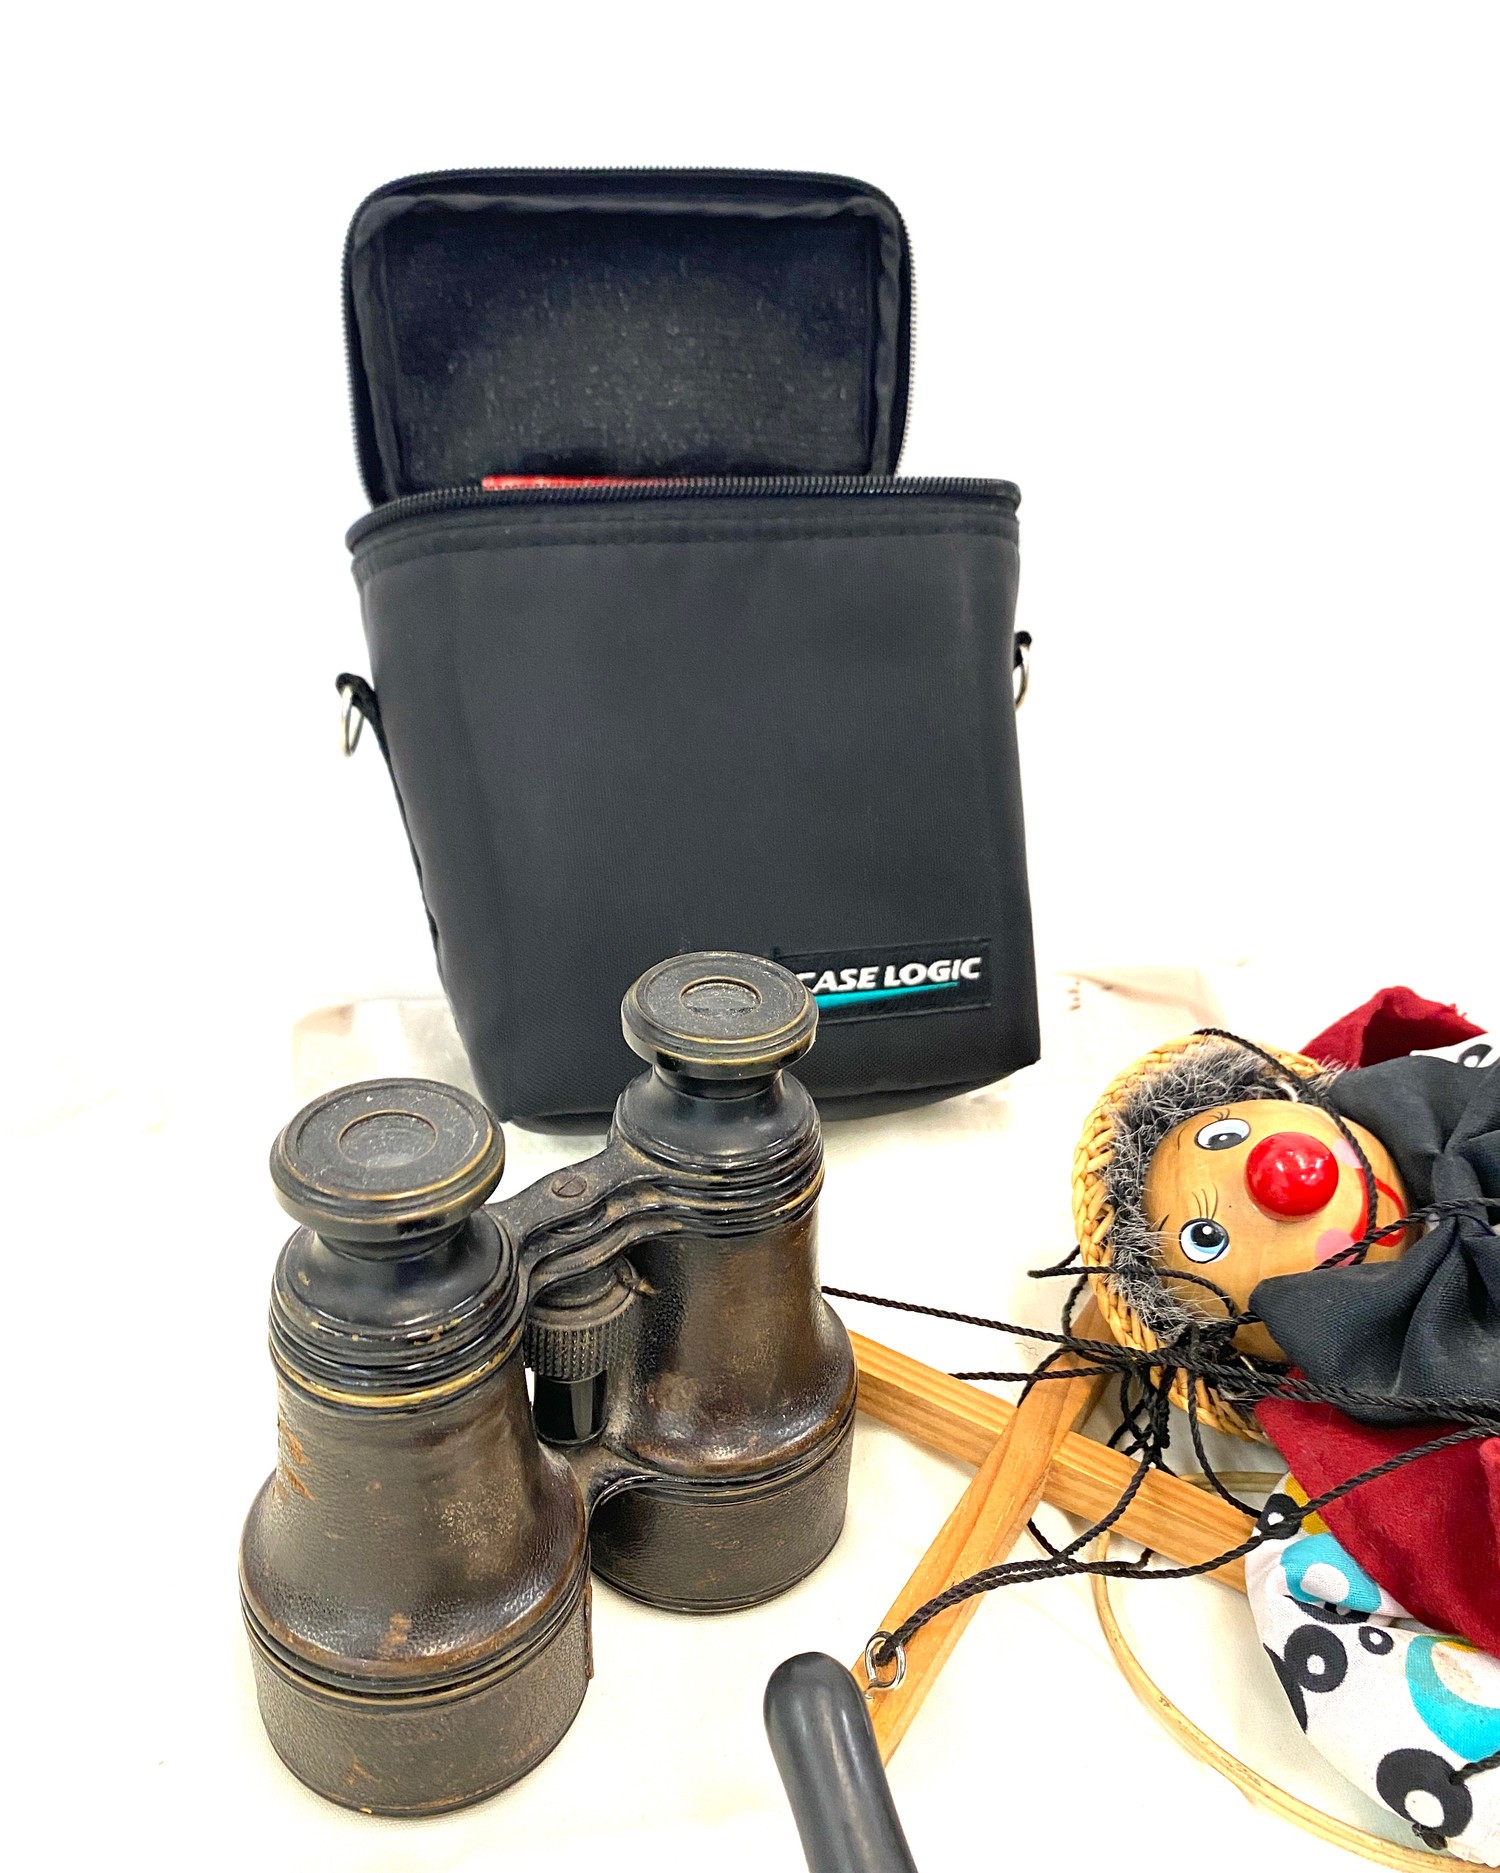 Selection of vintage and alter items to include wooden puppet, walkie talkies, binoculars etc - Image 3 of 7